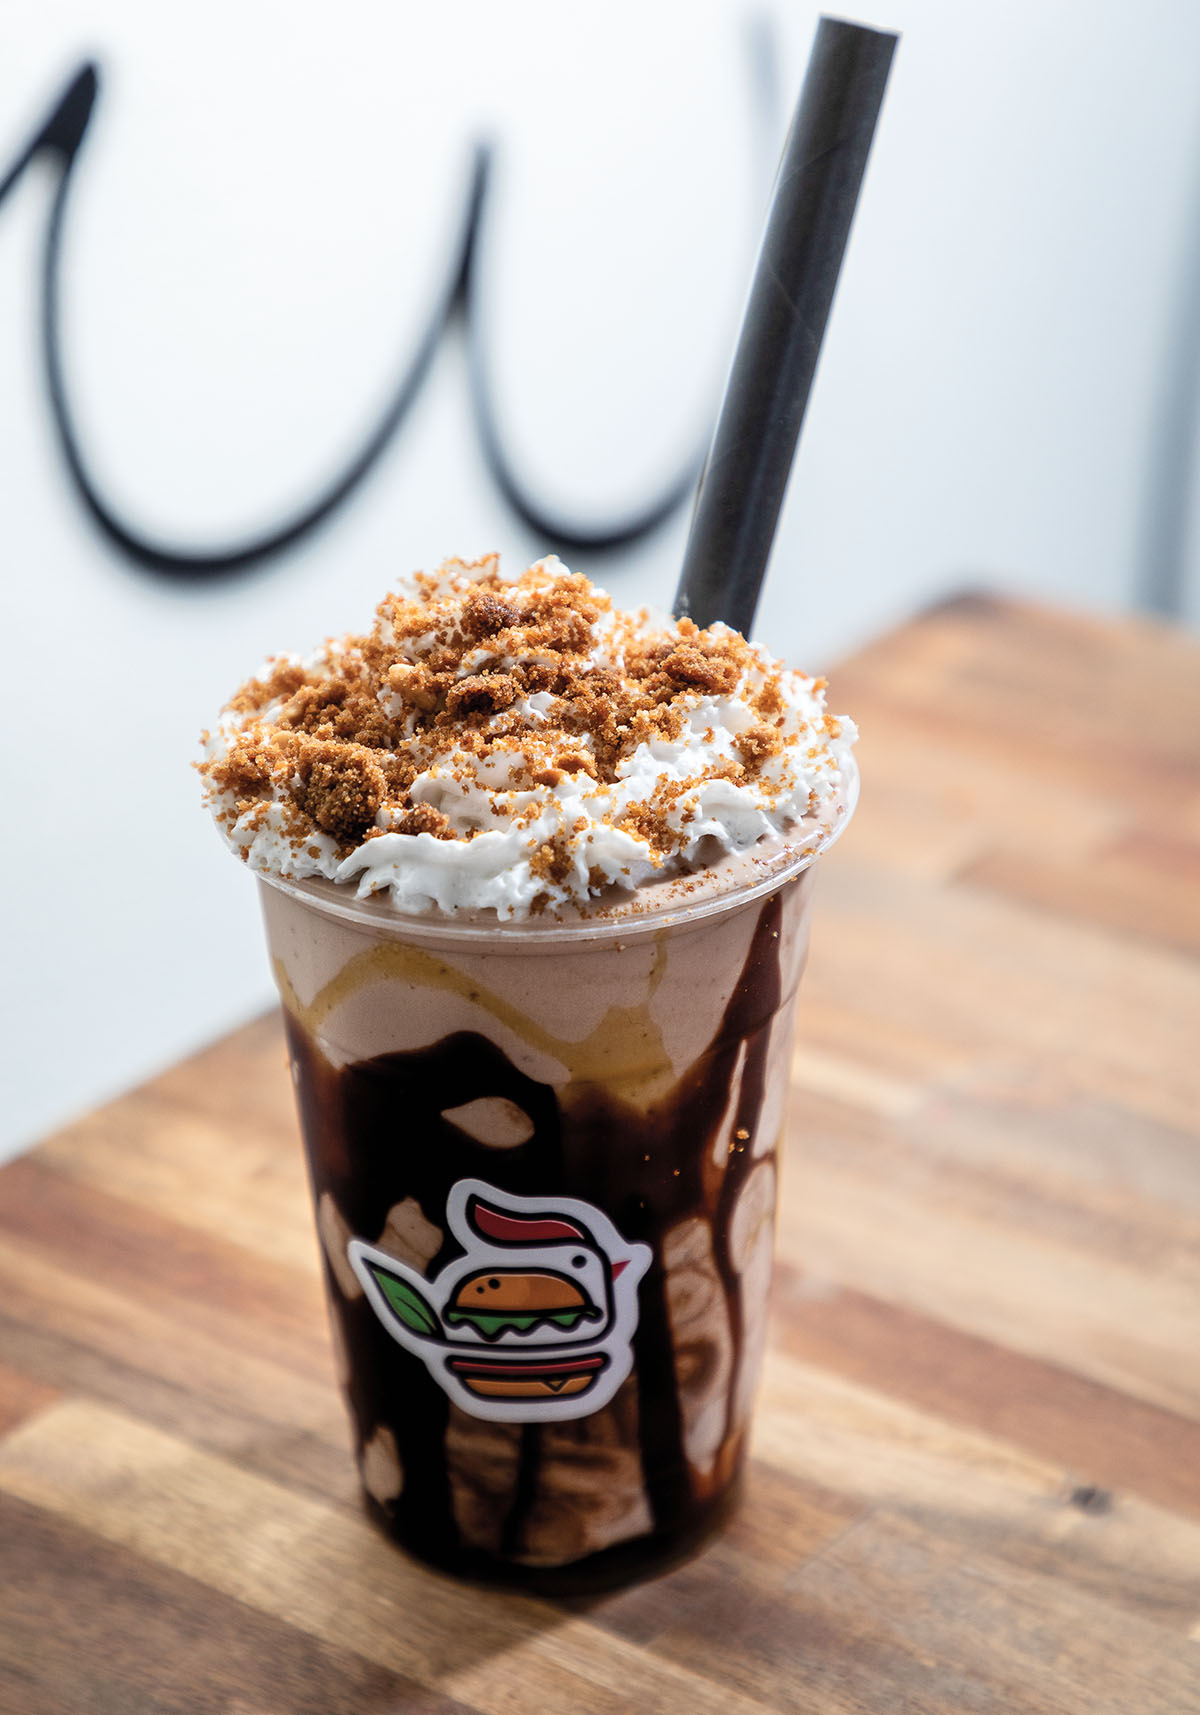 A plastic cup filled with swirls of chocolate, chocoalte ice cream, and topped with whipped topping and cookie crumbles